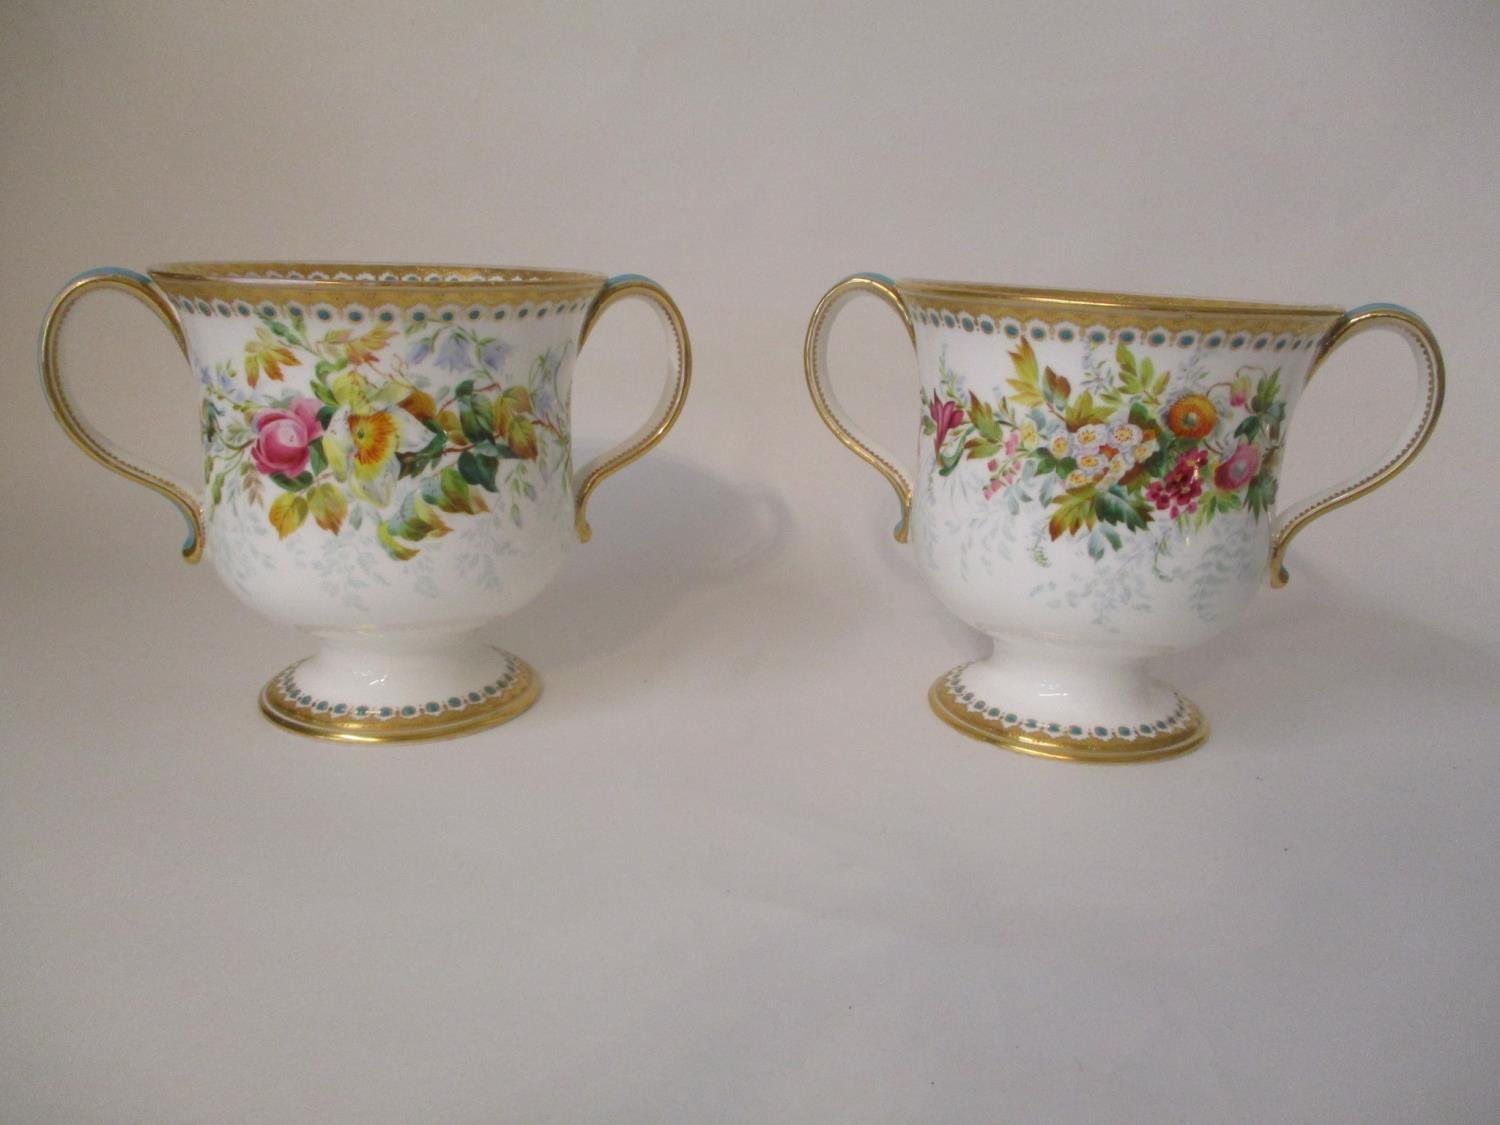 A pair of early 20th century English porcelain twin handled cups, on a splayed foot decorated with